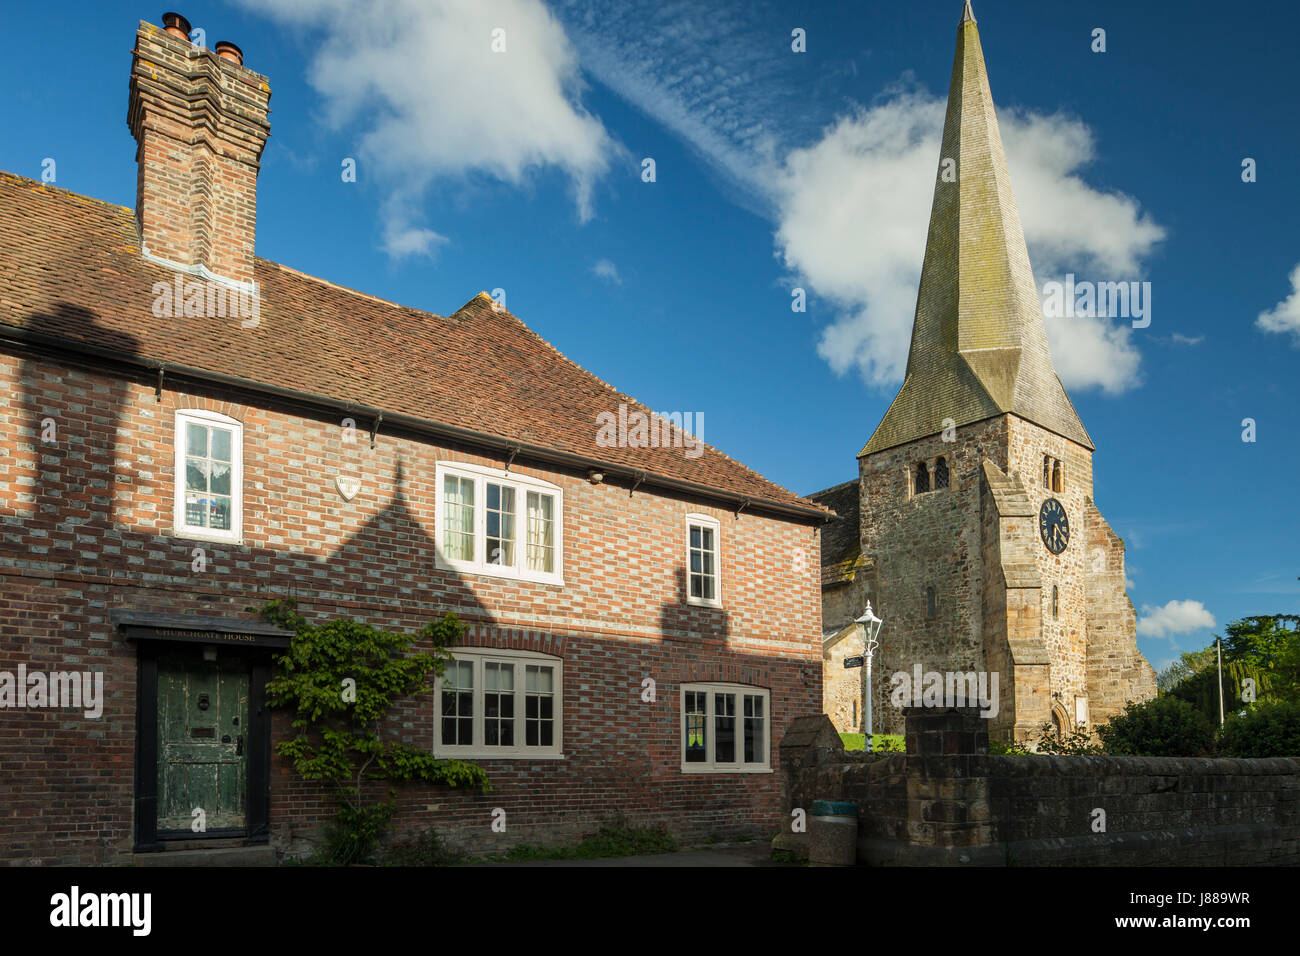 St.-Andreas-Kirche & St Mary in Befiederung, East Sussex, England. Stockfoto